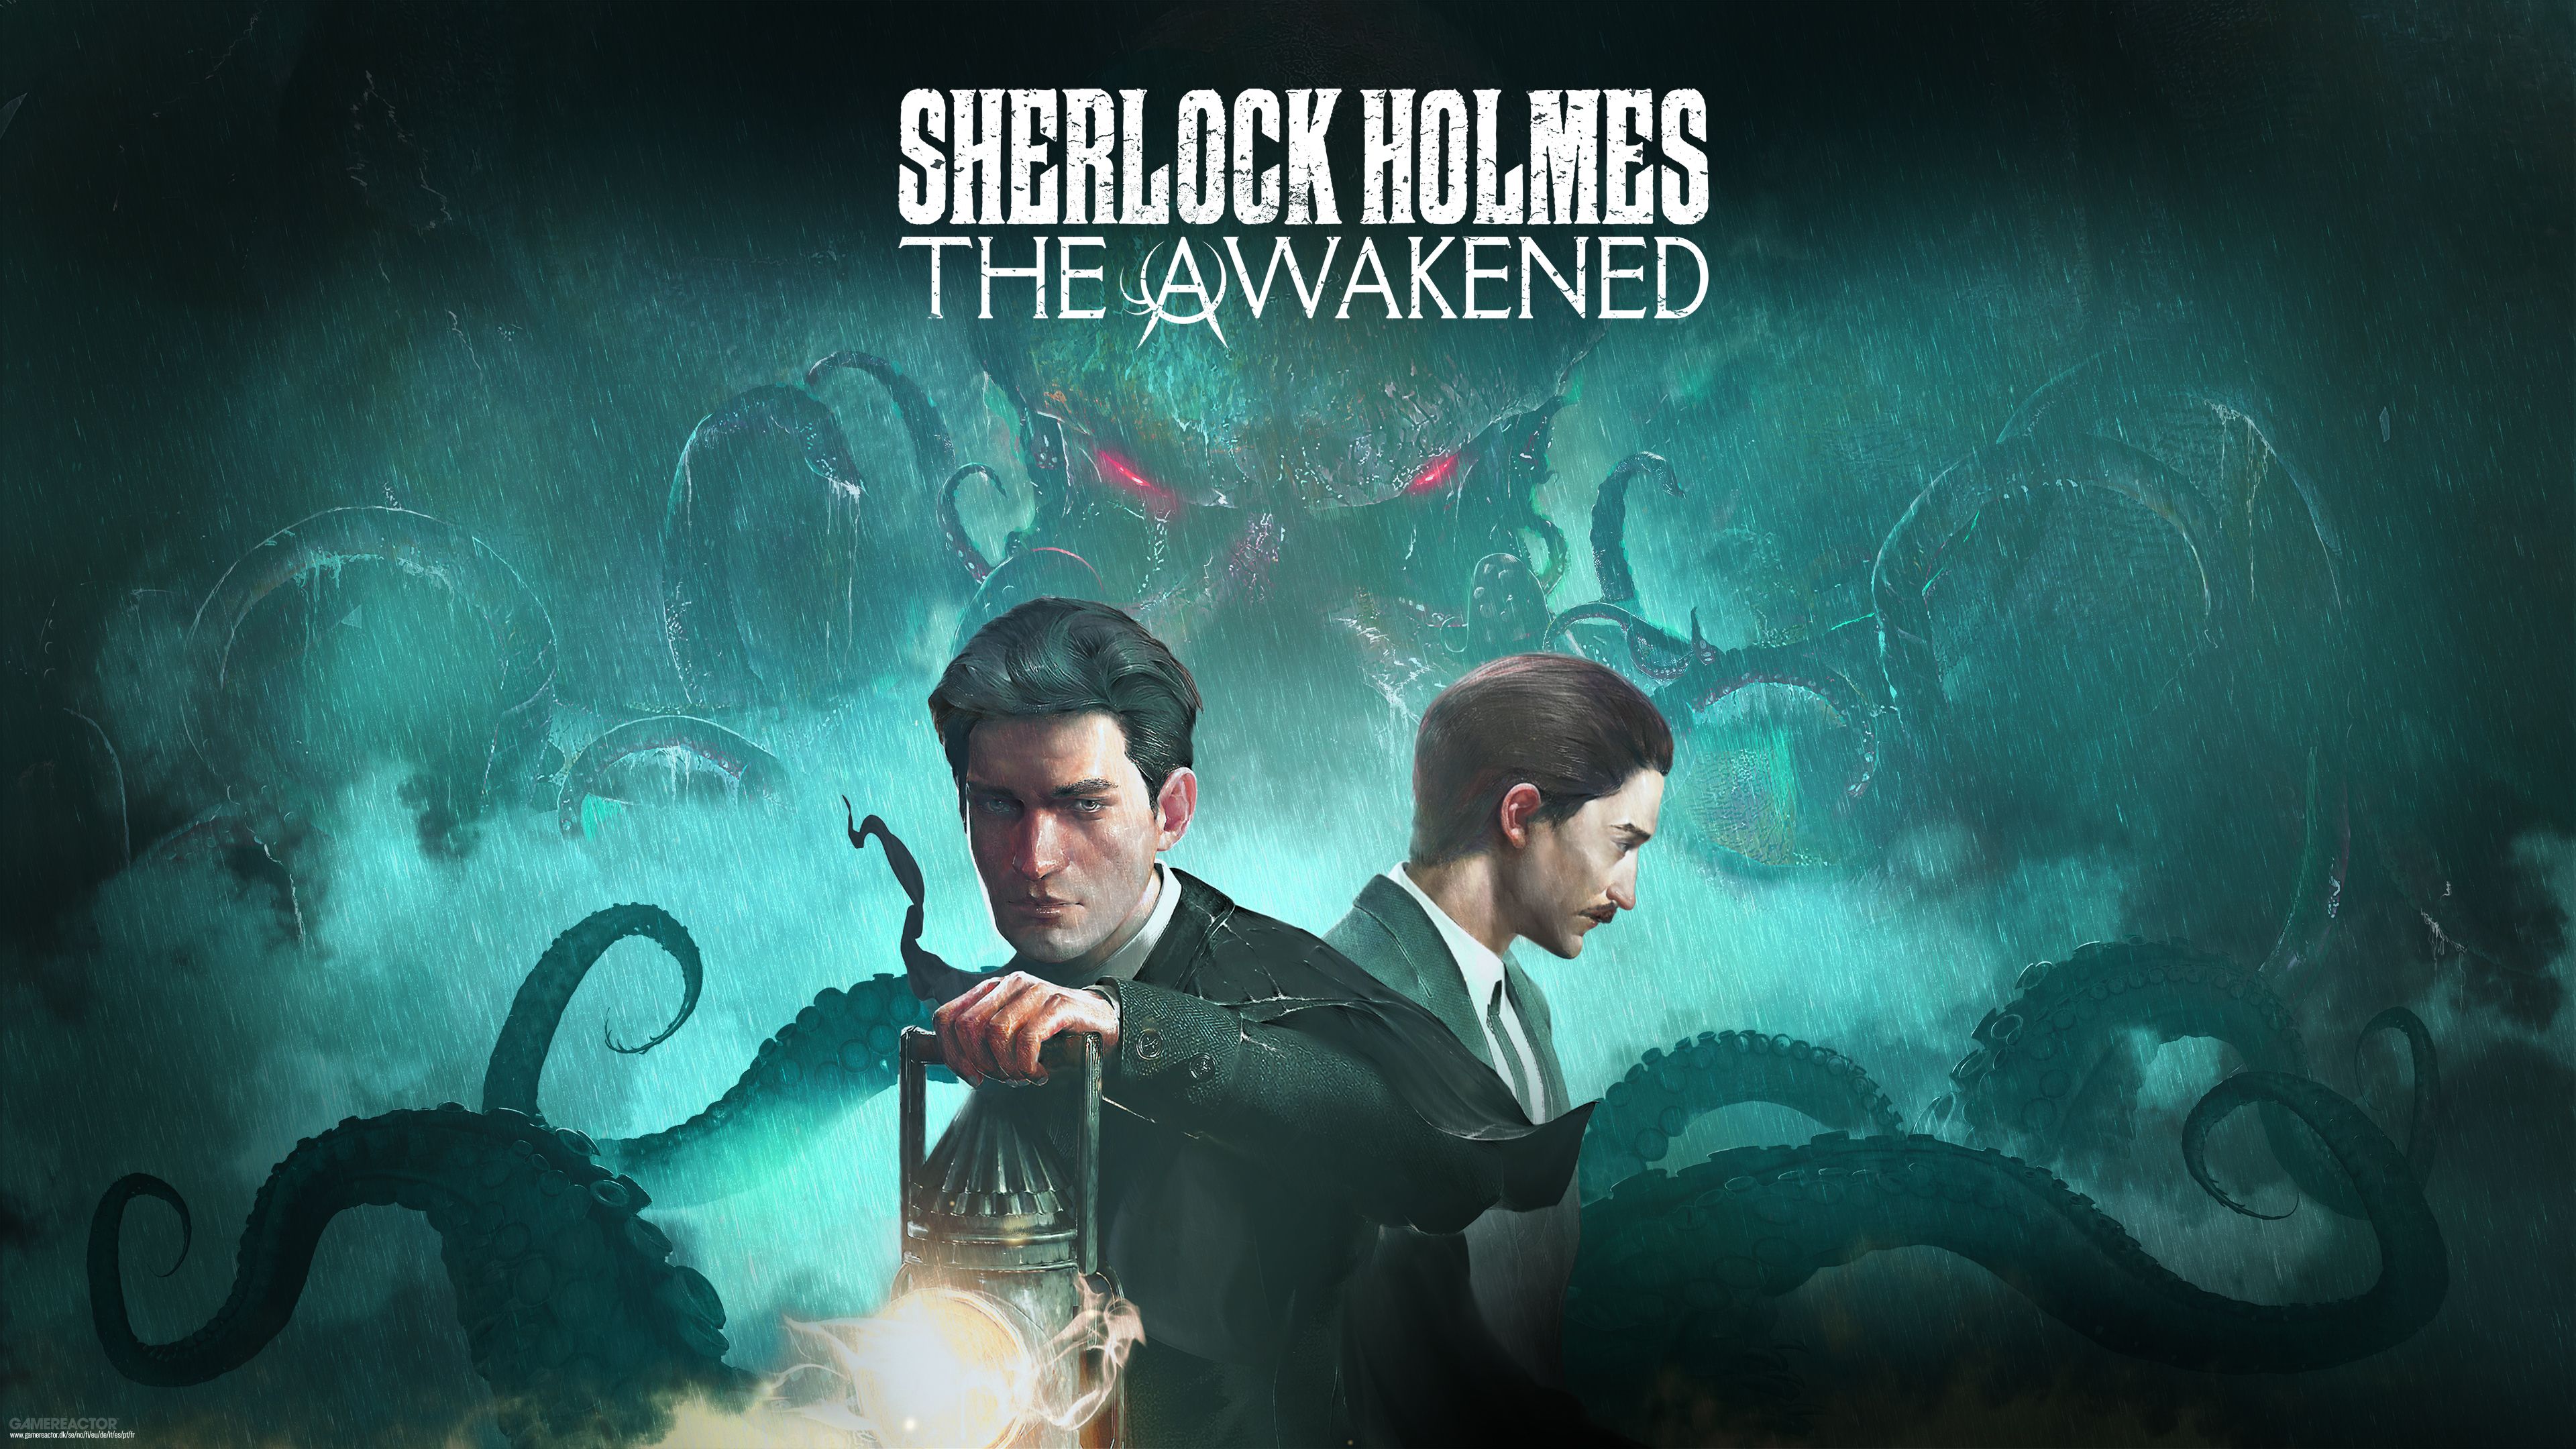 Sherlock Holmes The Awakened is already gold and will arrive on April 11